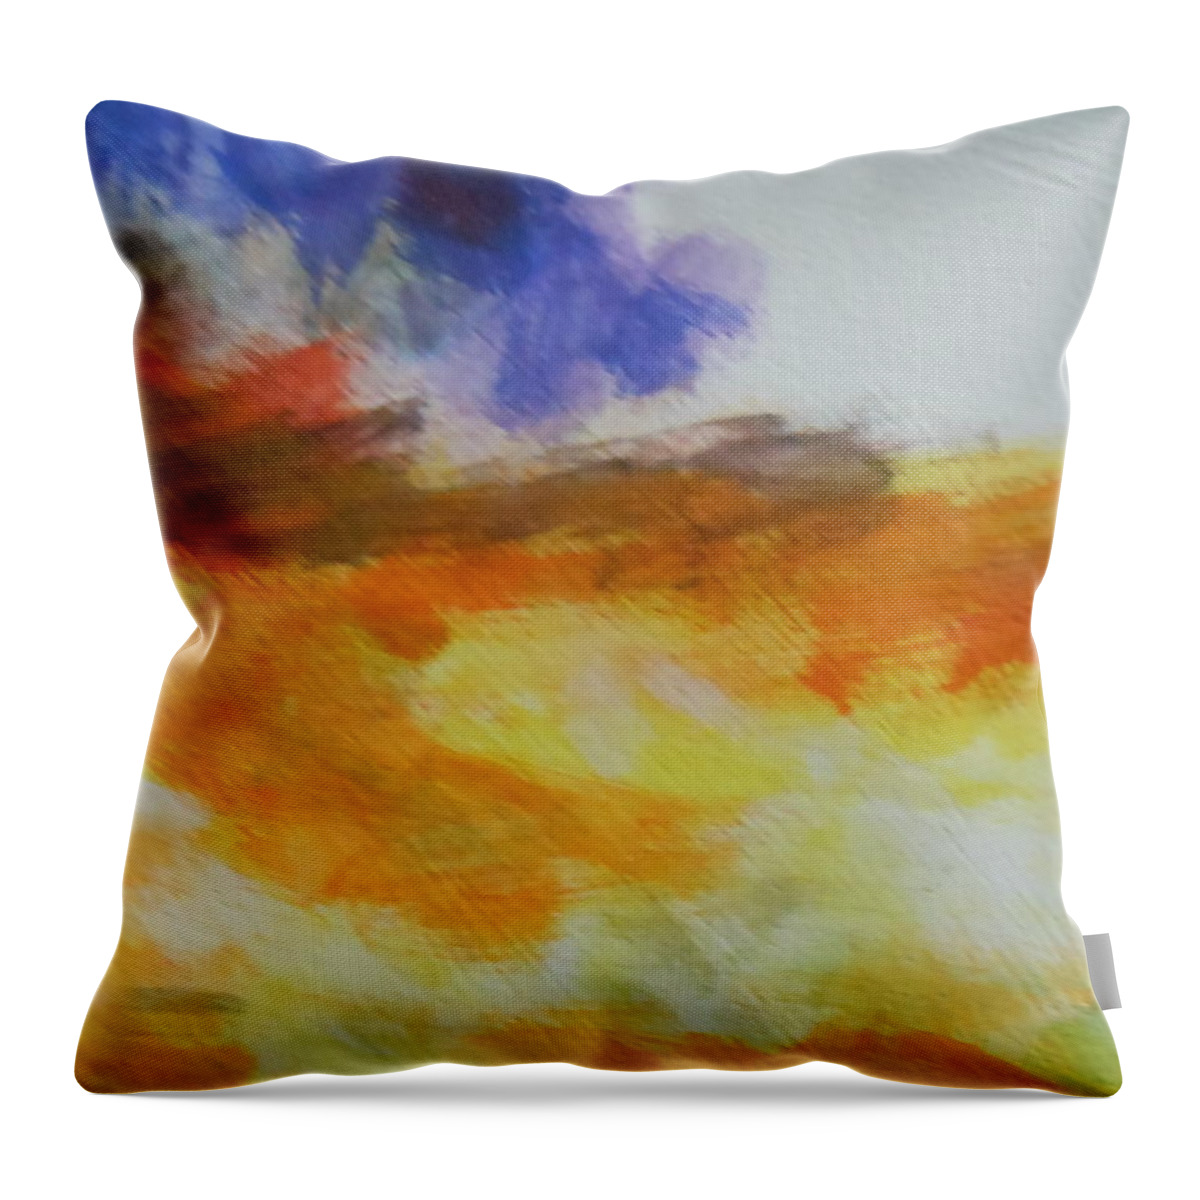 Water Throw Pillow featuring the painting Abstract #9 by Frederick Lyle Morris - Disabled Veteran